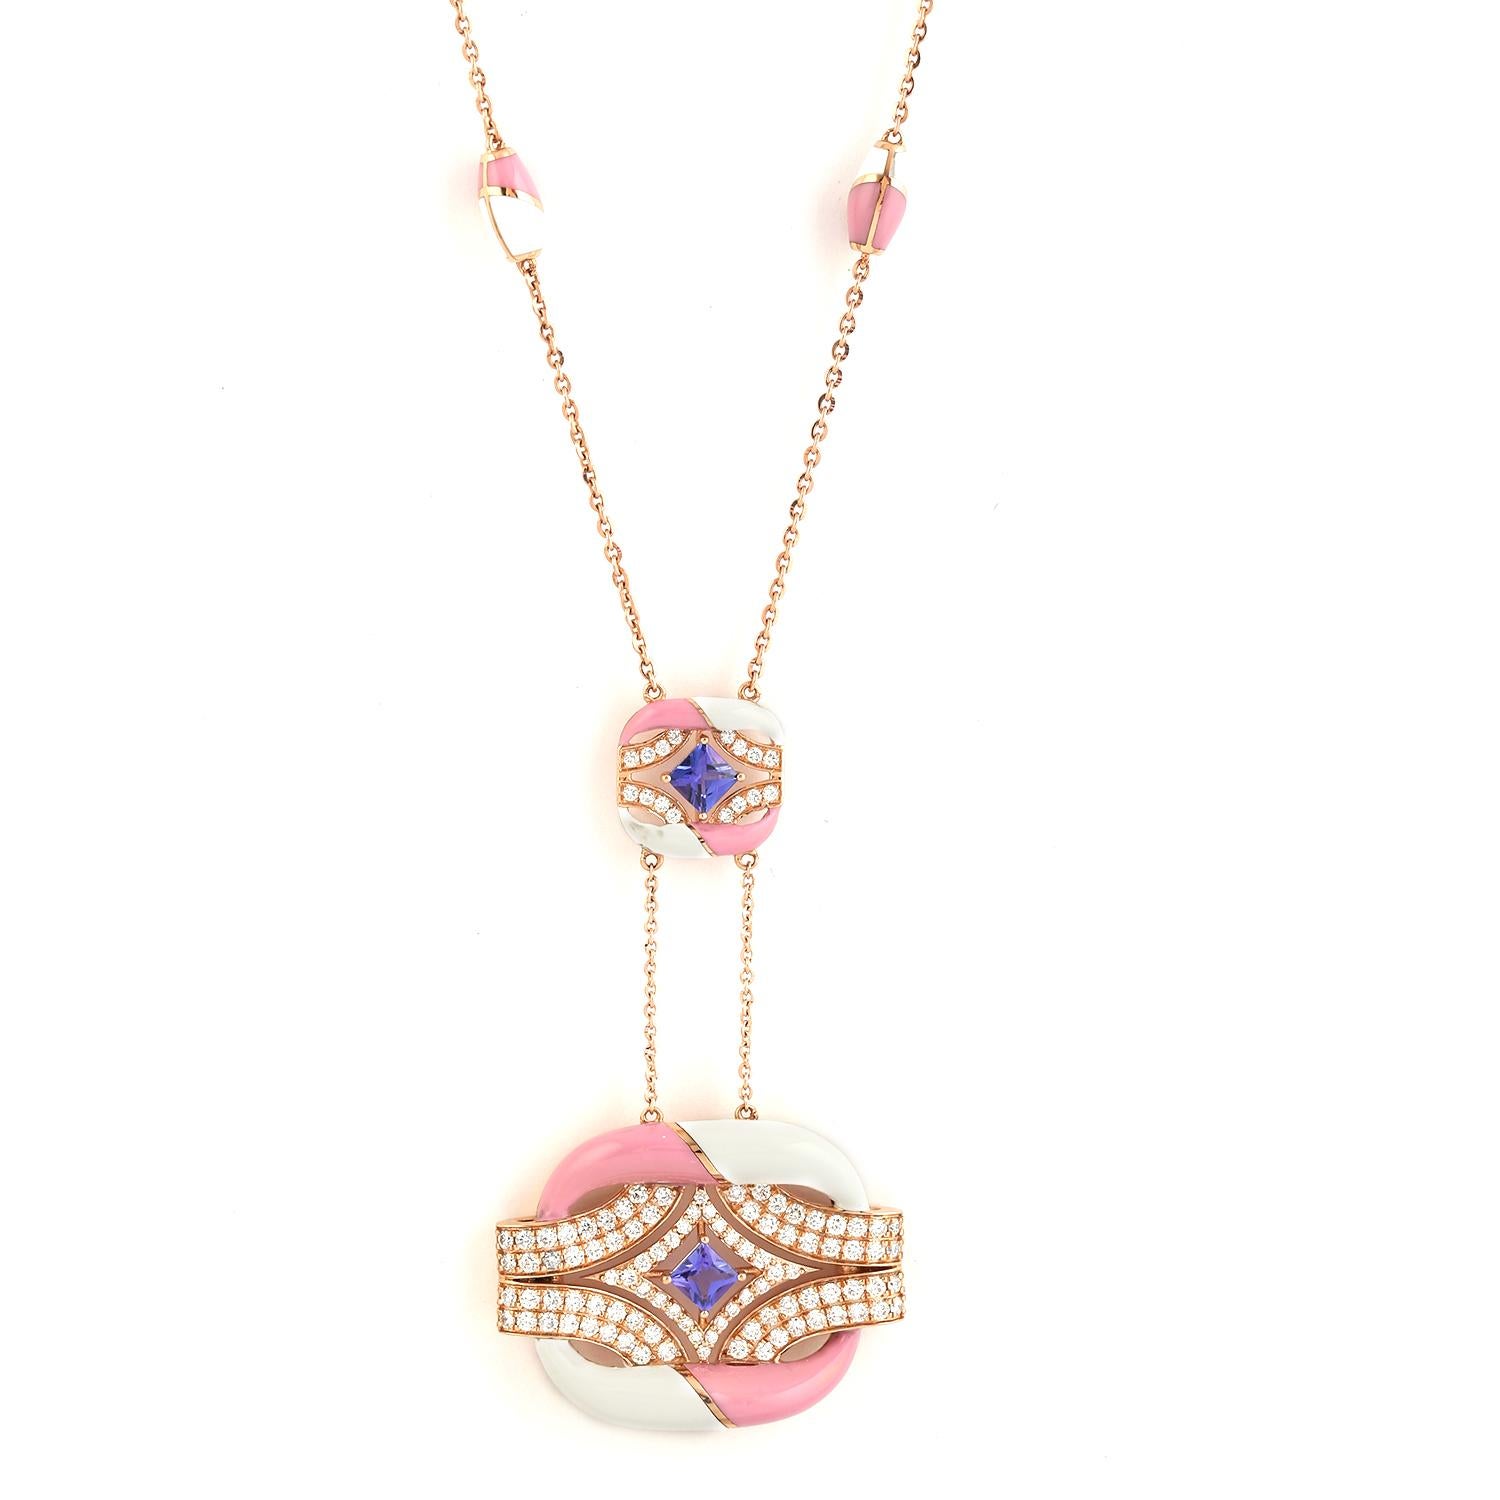 Mixed Cut 18k Rose Gold Necklace With Center Tanzanite and Pink & White Ceramic Stations For Sale